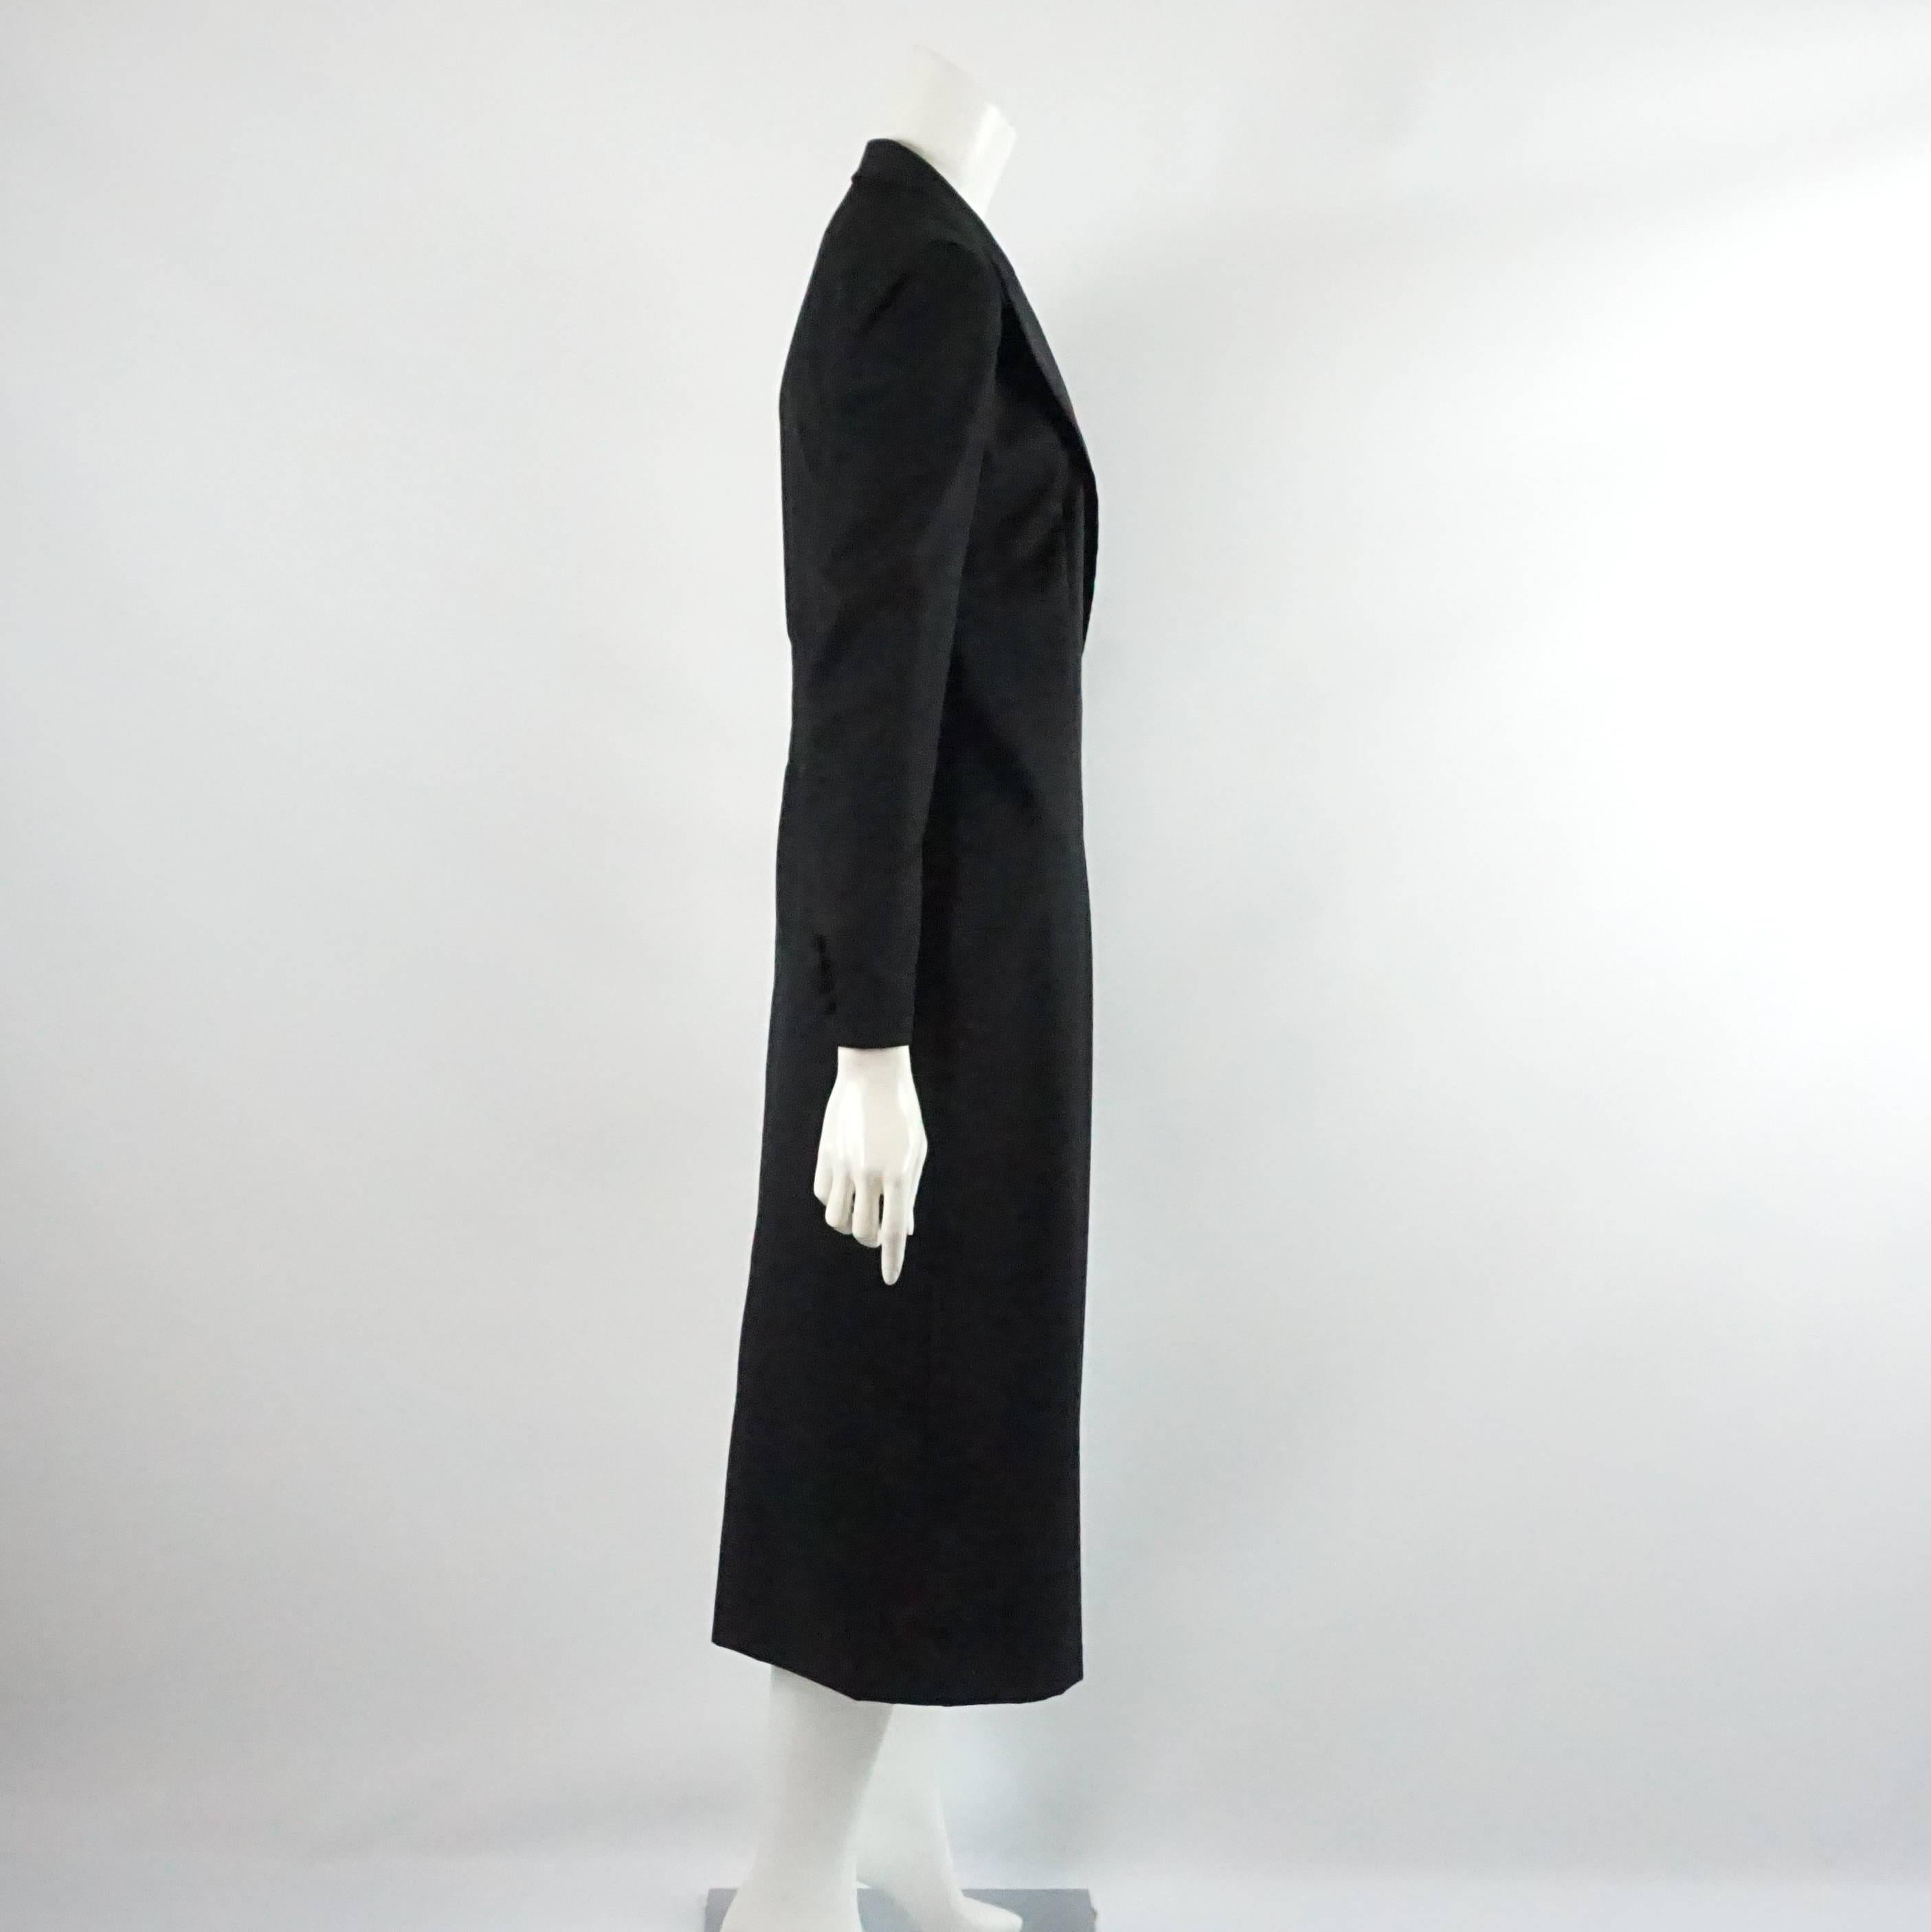 Chloe Black Wool Tuxedo Style Coat with Satin Collar - 38 In Good Condition For Sale In West Palm Beach, FL